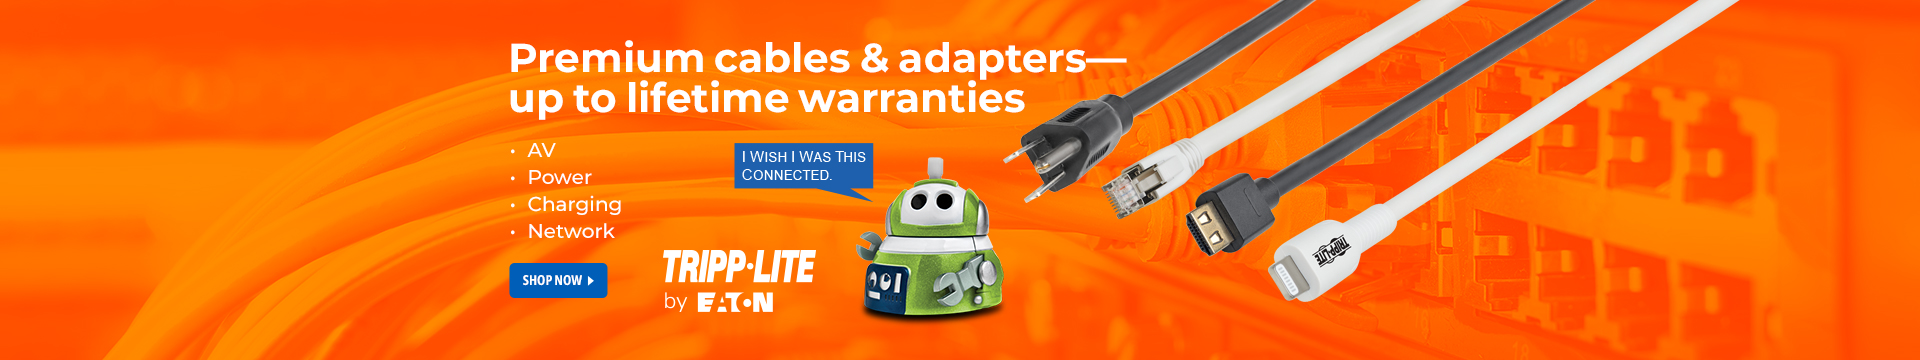 Premium cables & adapters - up to lifetime warranties